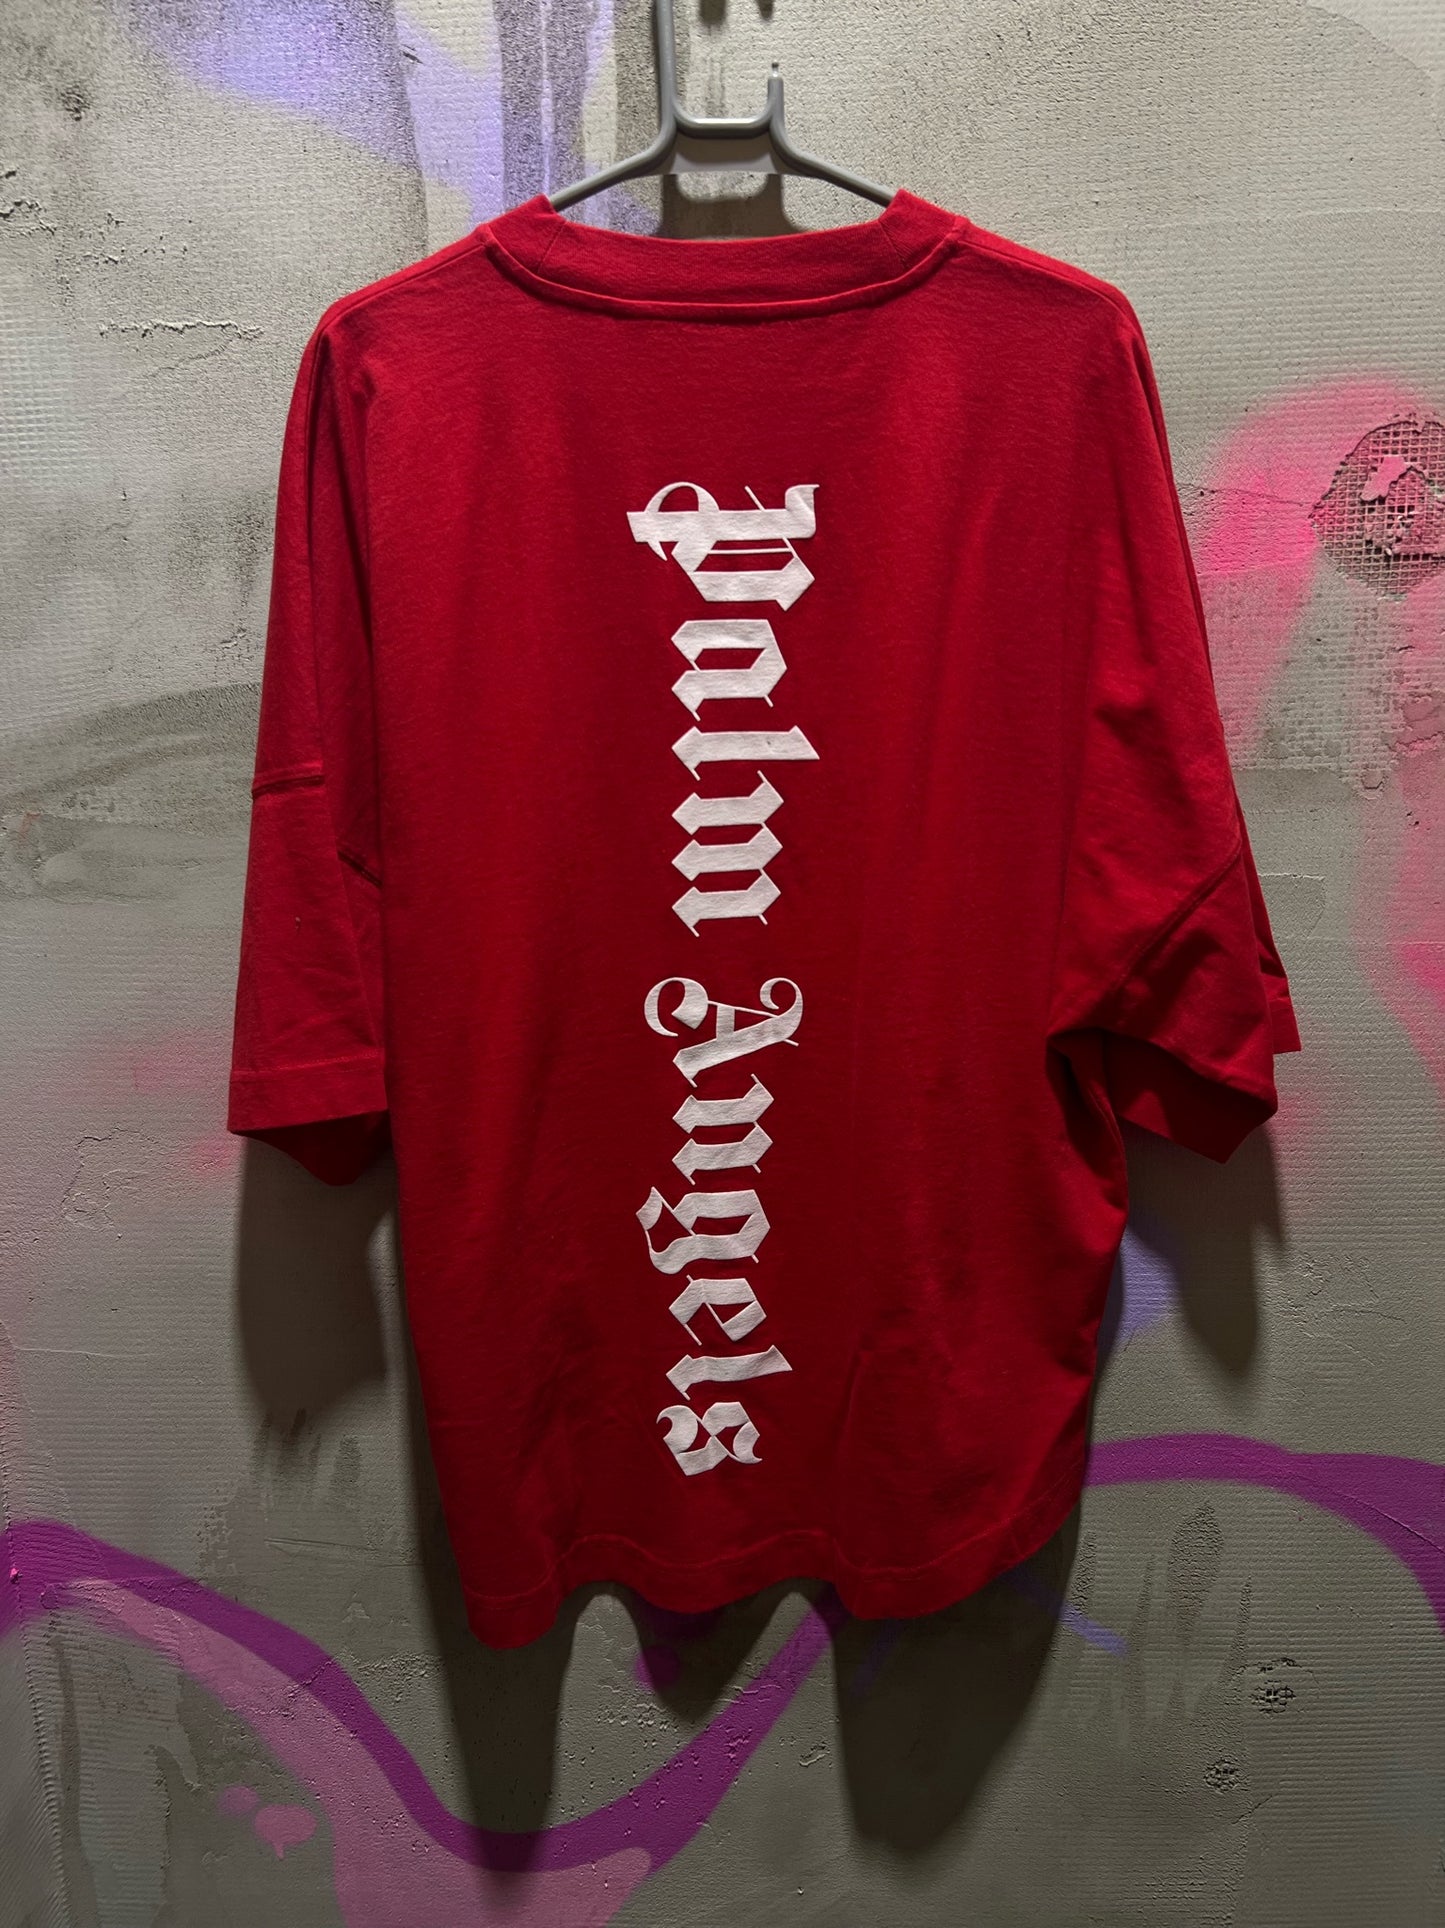 PALM ANGELS RED OVERSIZED T-SHIRT